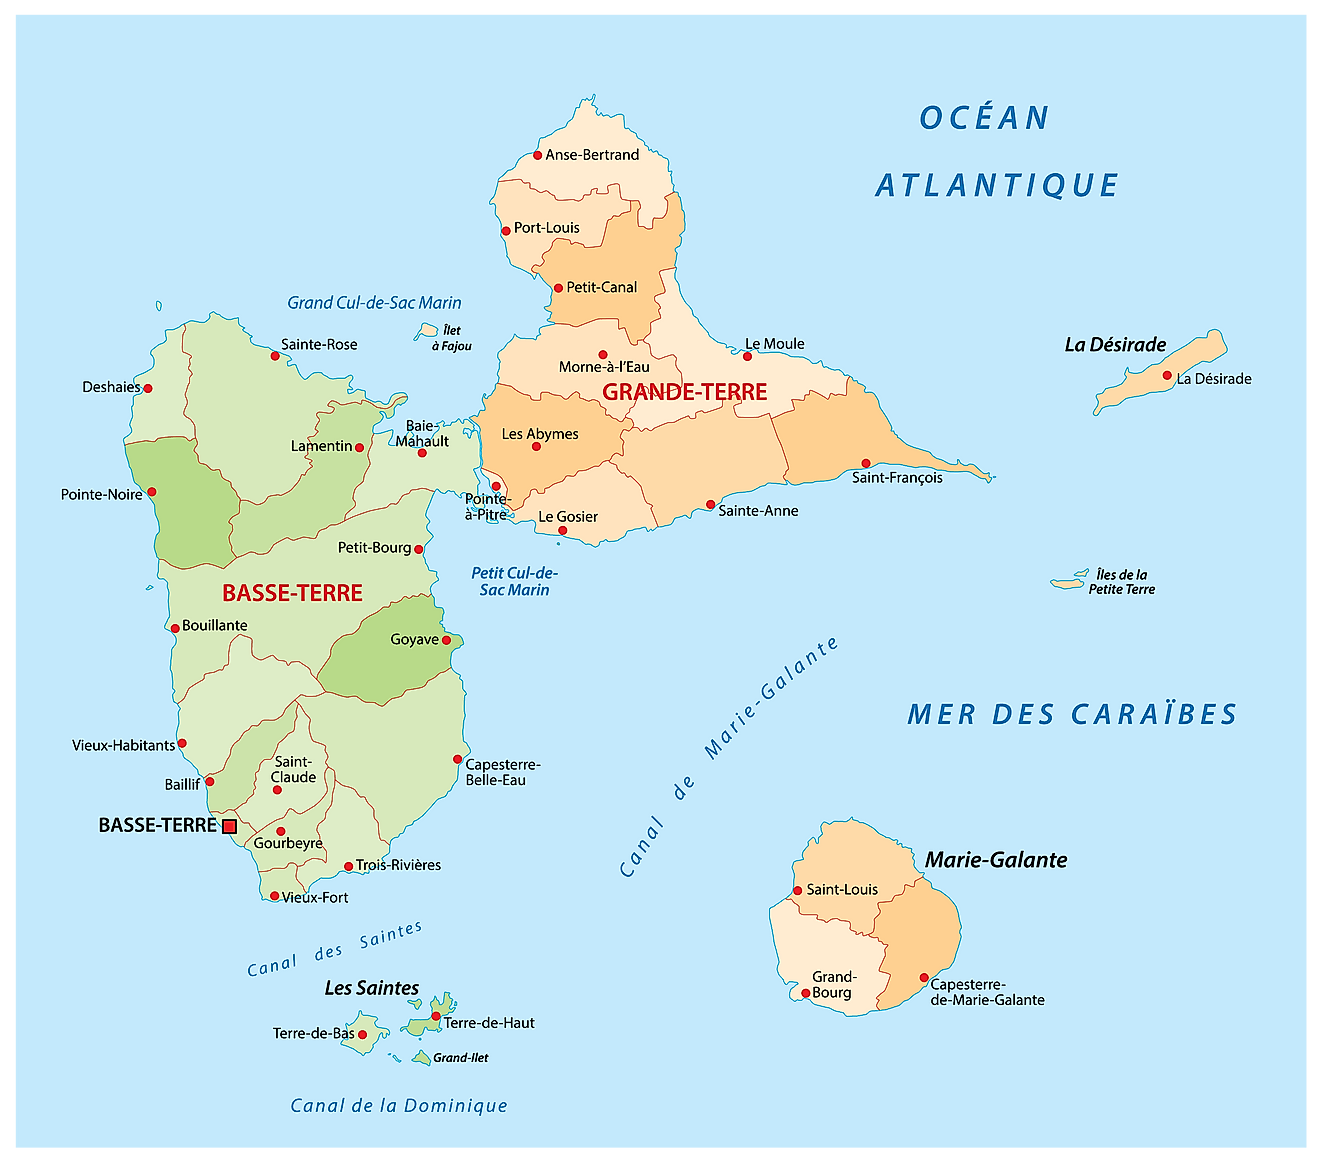 Political Map of Guadeloupe showing its capital city - Basse-Terre